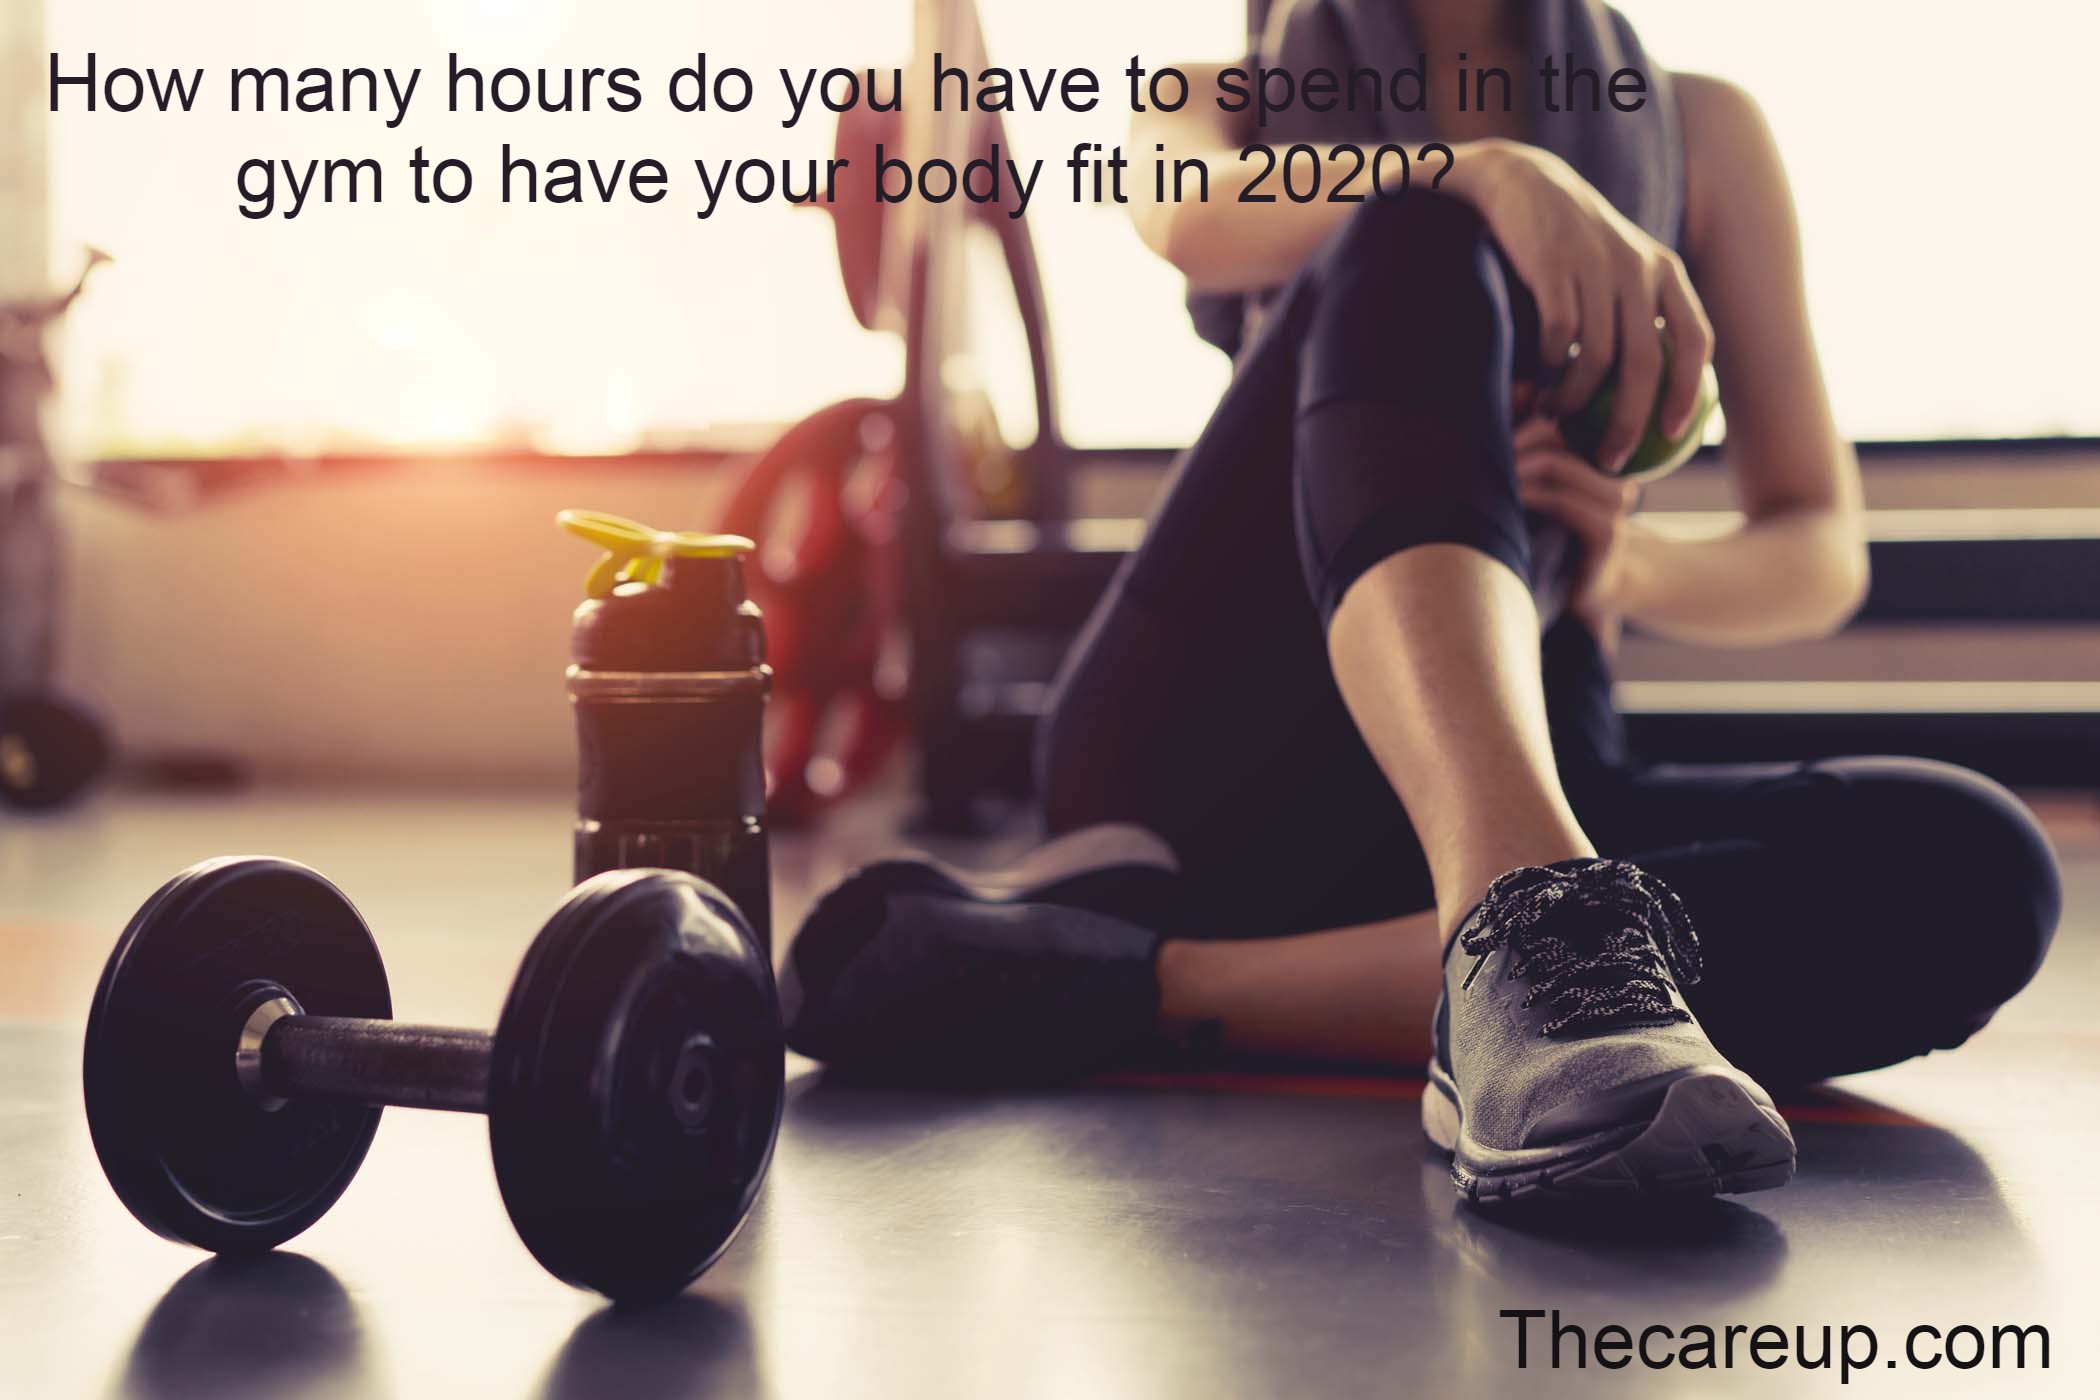 How many hours do you have to spend in the gym to have your body fit in 2020?